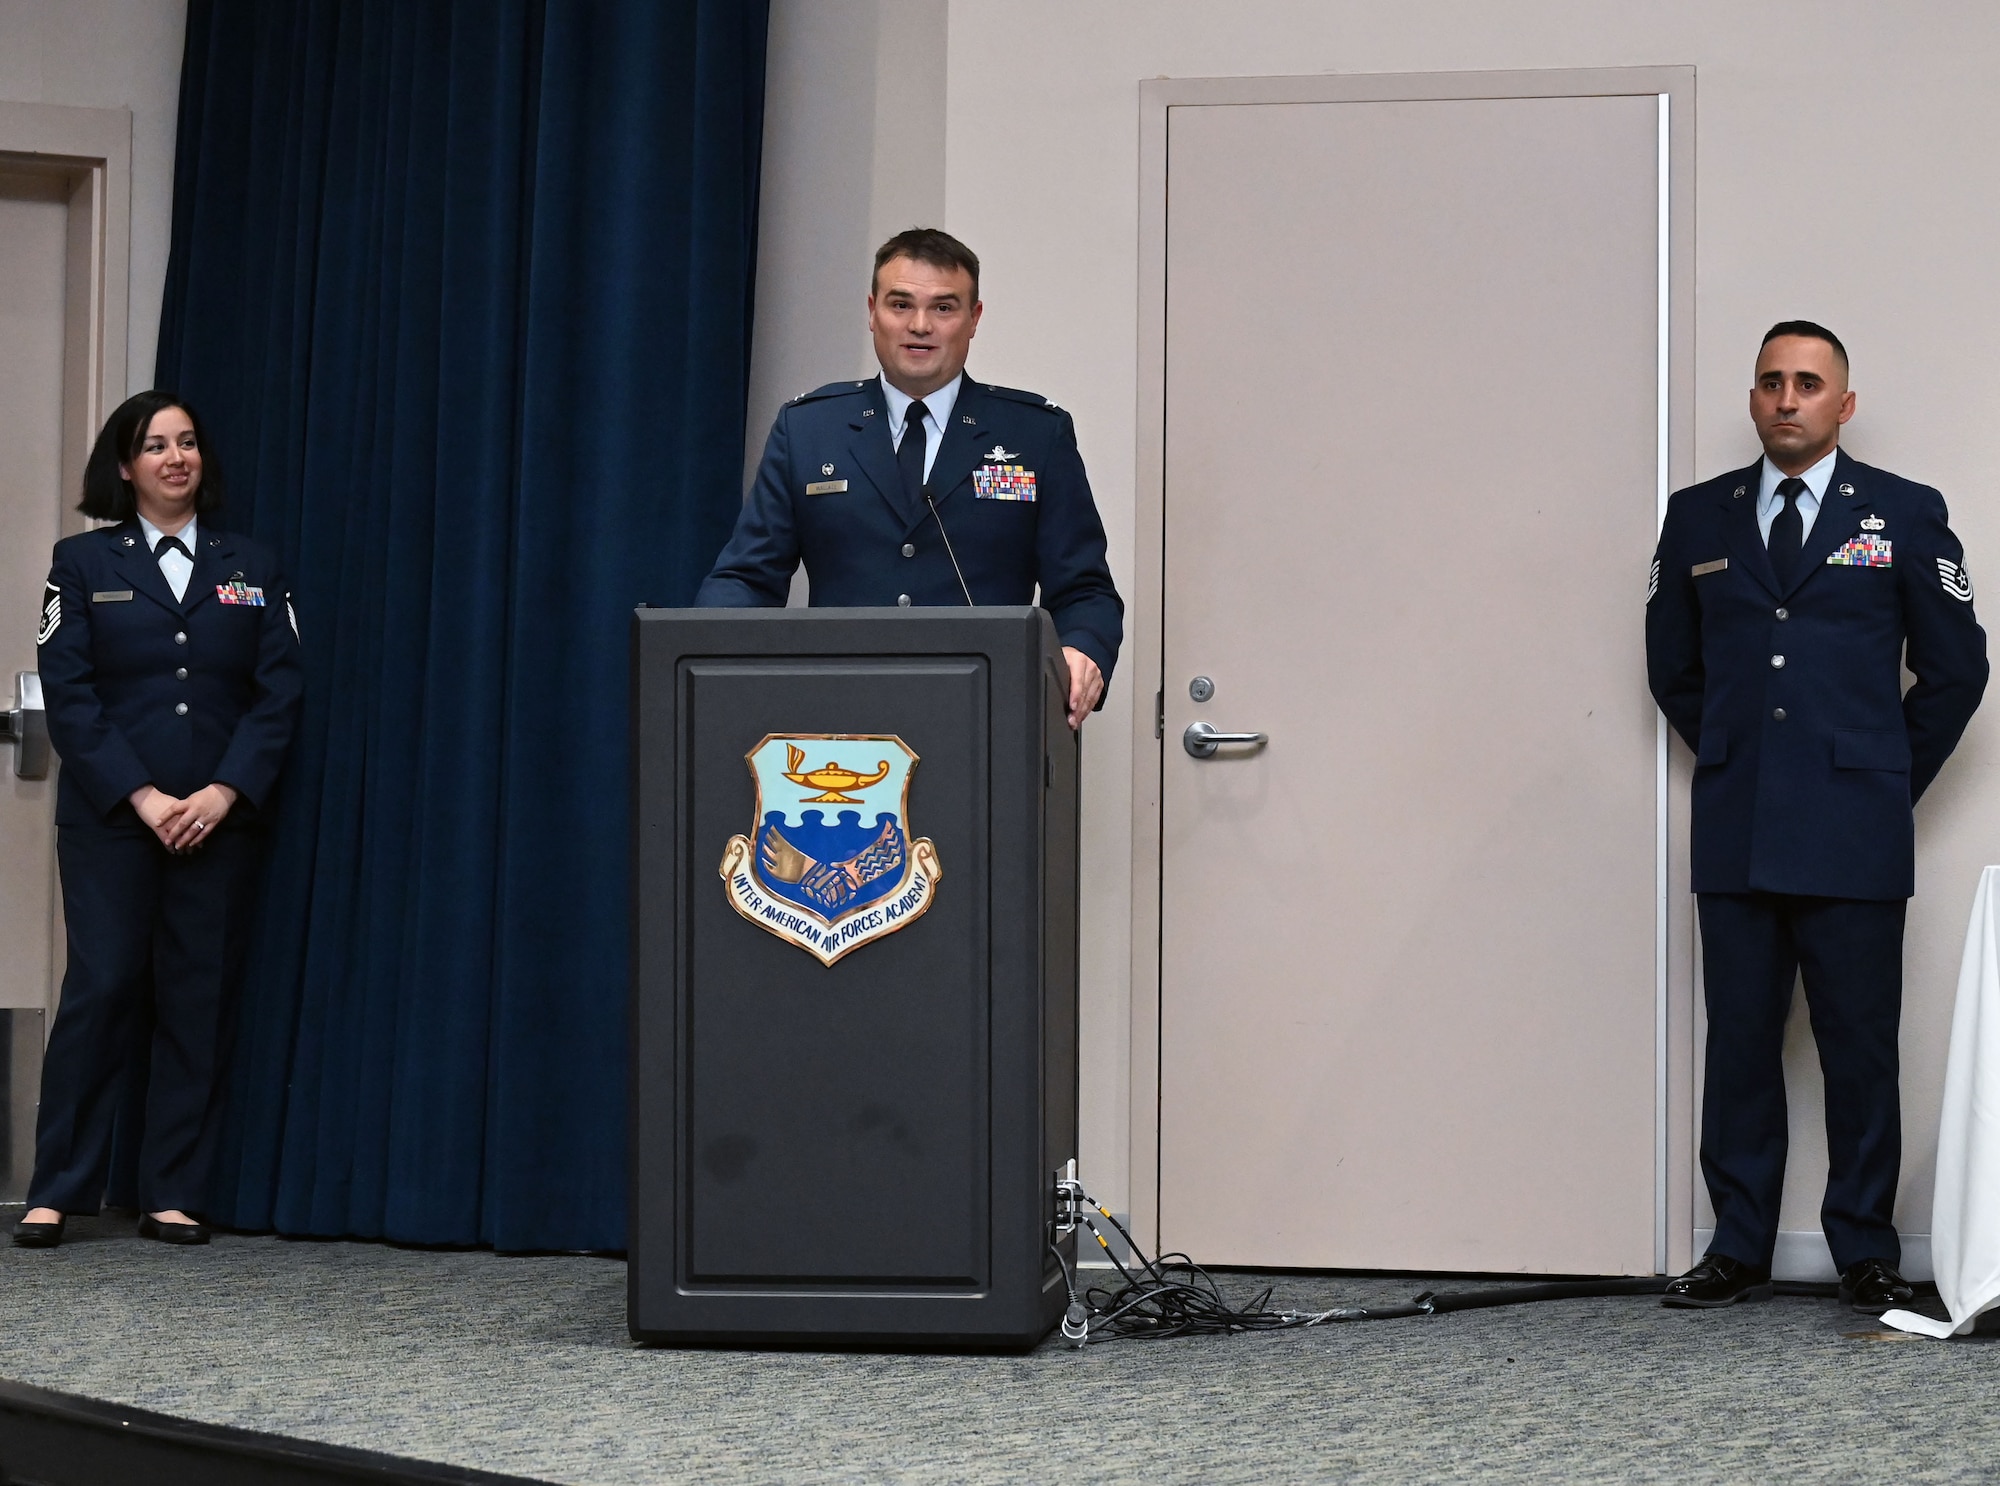 Col. Richard Wallace, 960th Cyberspace Operations Group commander, delivers a speech during the 960th COG change of command ceremony Oct. 15, 2022, at Joint Base San Antonio-Lackland, Texas. (U.S. Air Force photo by Staff Sgt. Monet Villacorte)